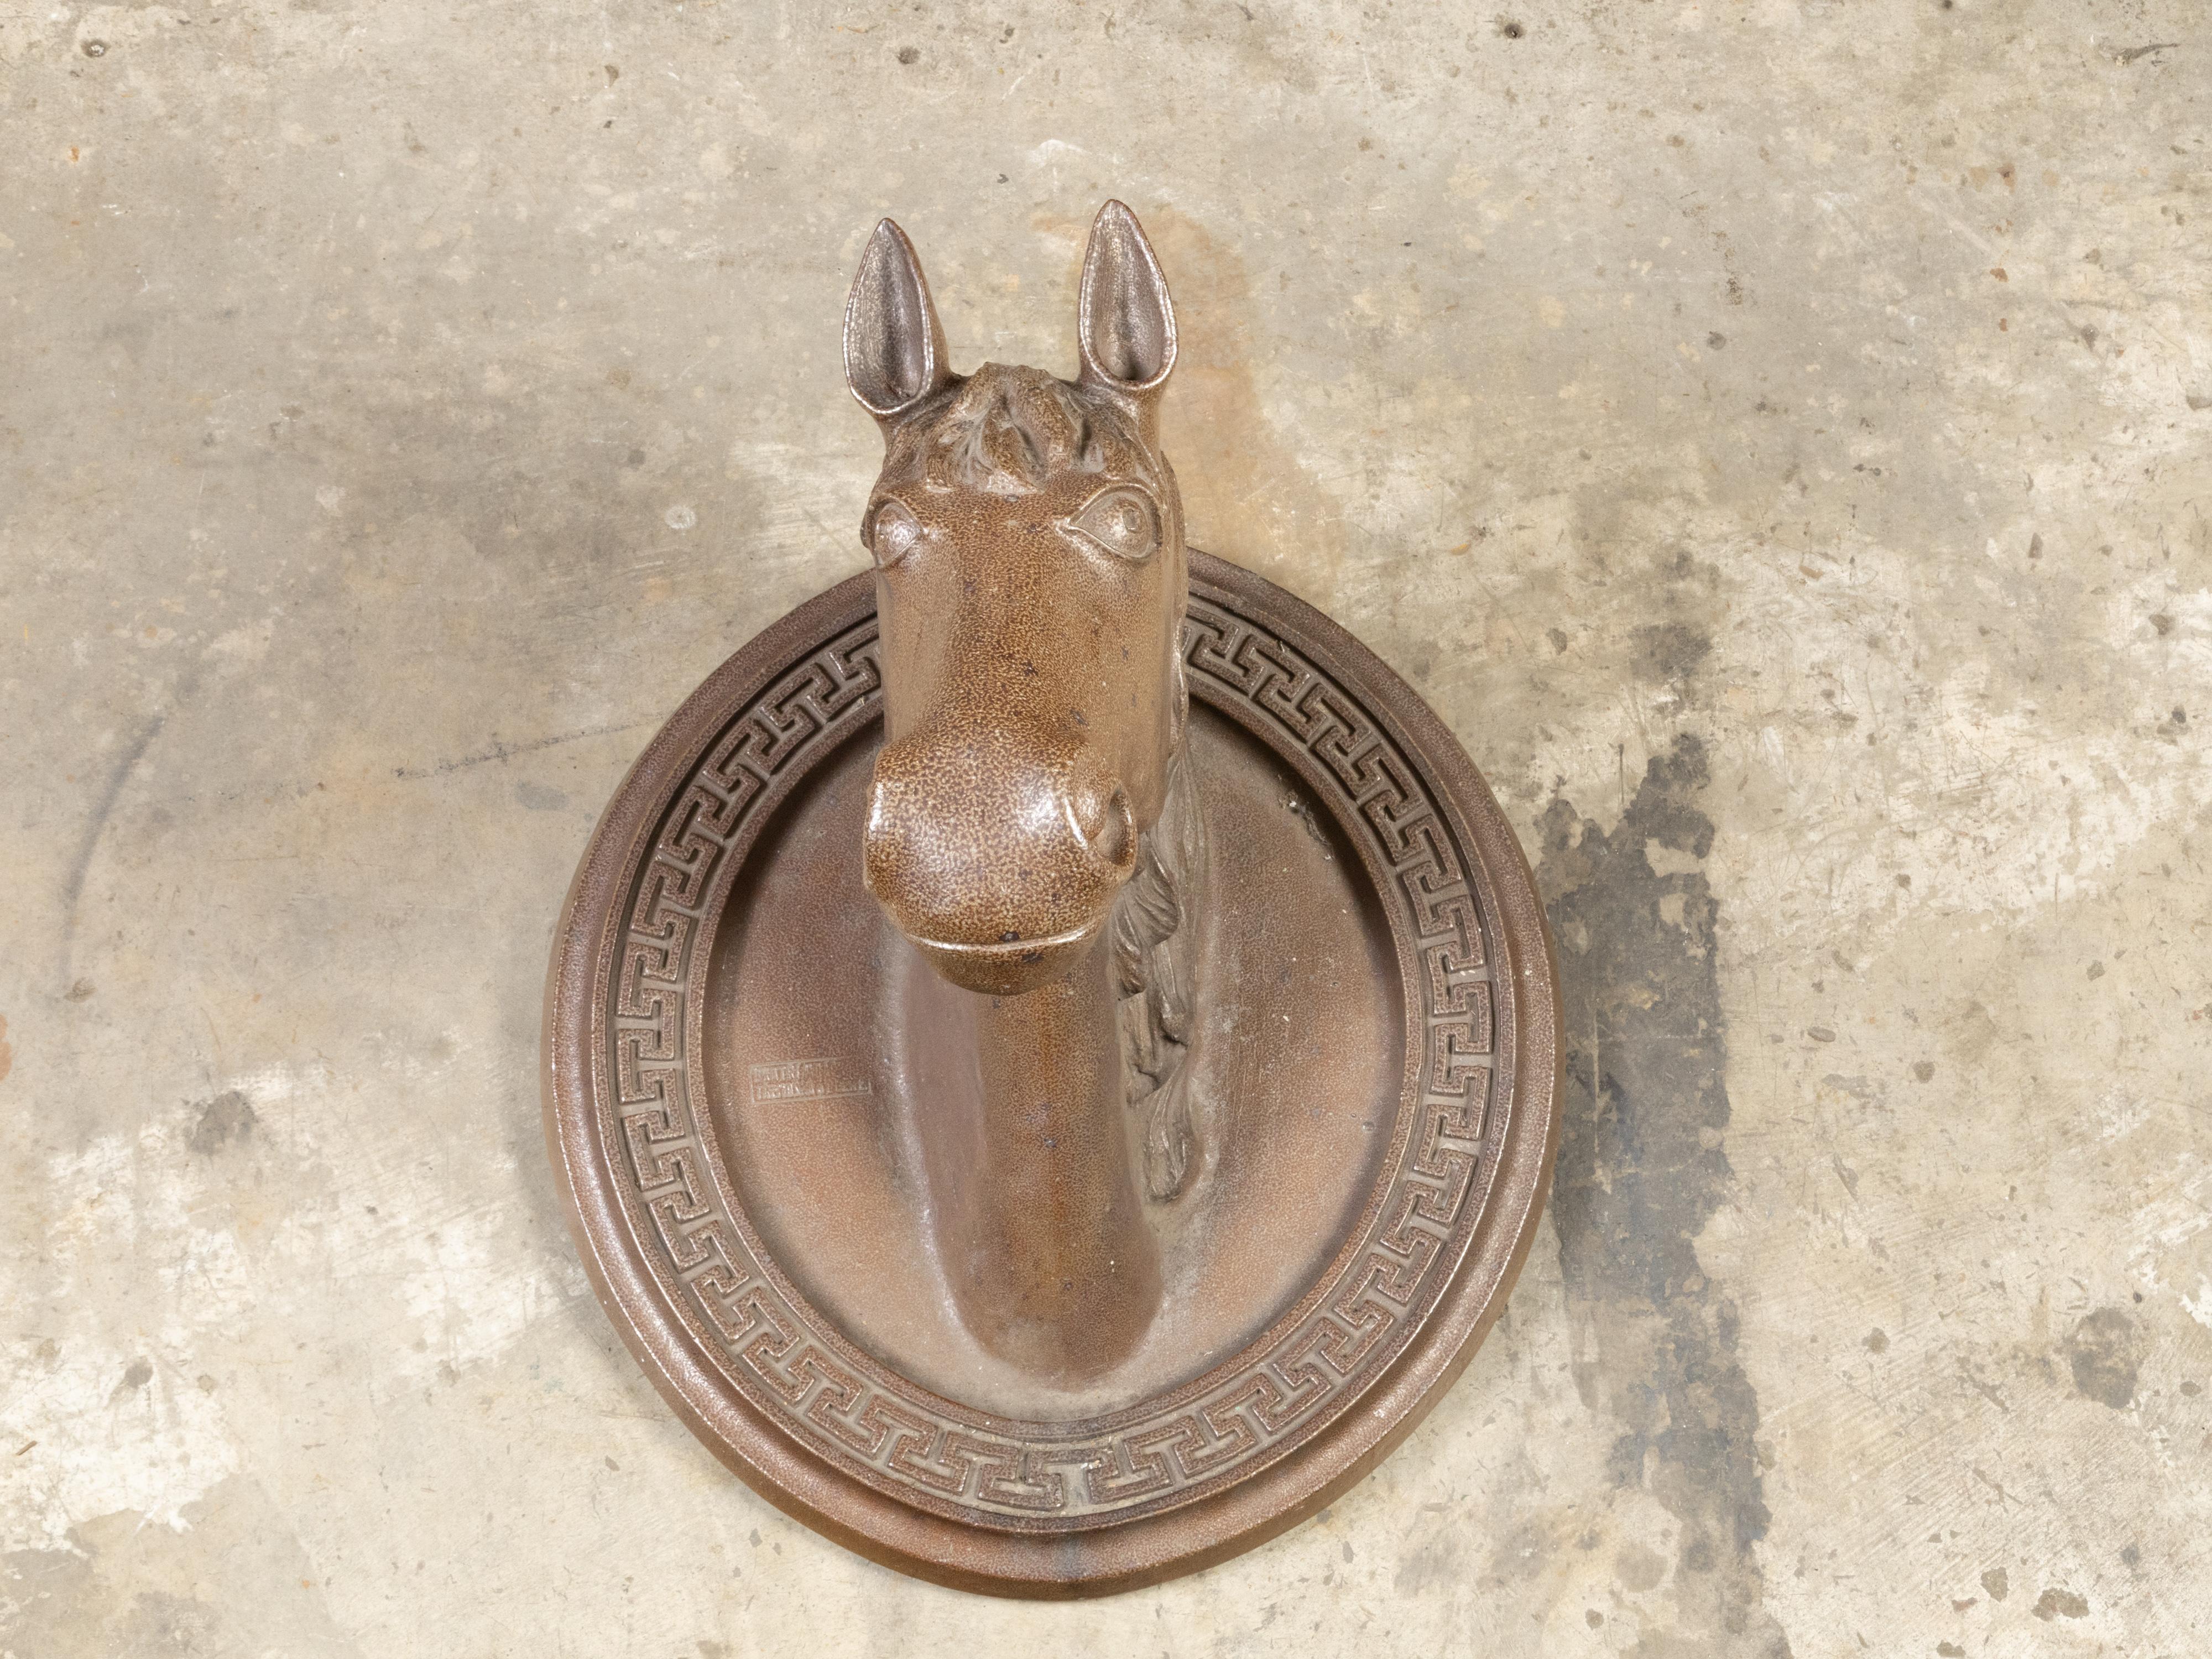 An English Victorian period terracotta horse head sculpture from the 19th century on oval backplate with Greek Key motifs. Created in England during the reign of Queen Victoria in the 19th century, this terracotta wall mounted sculpture depicts a